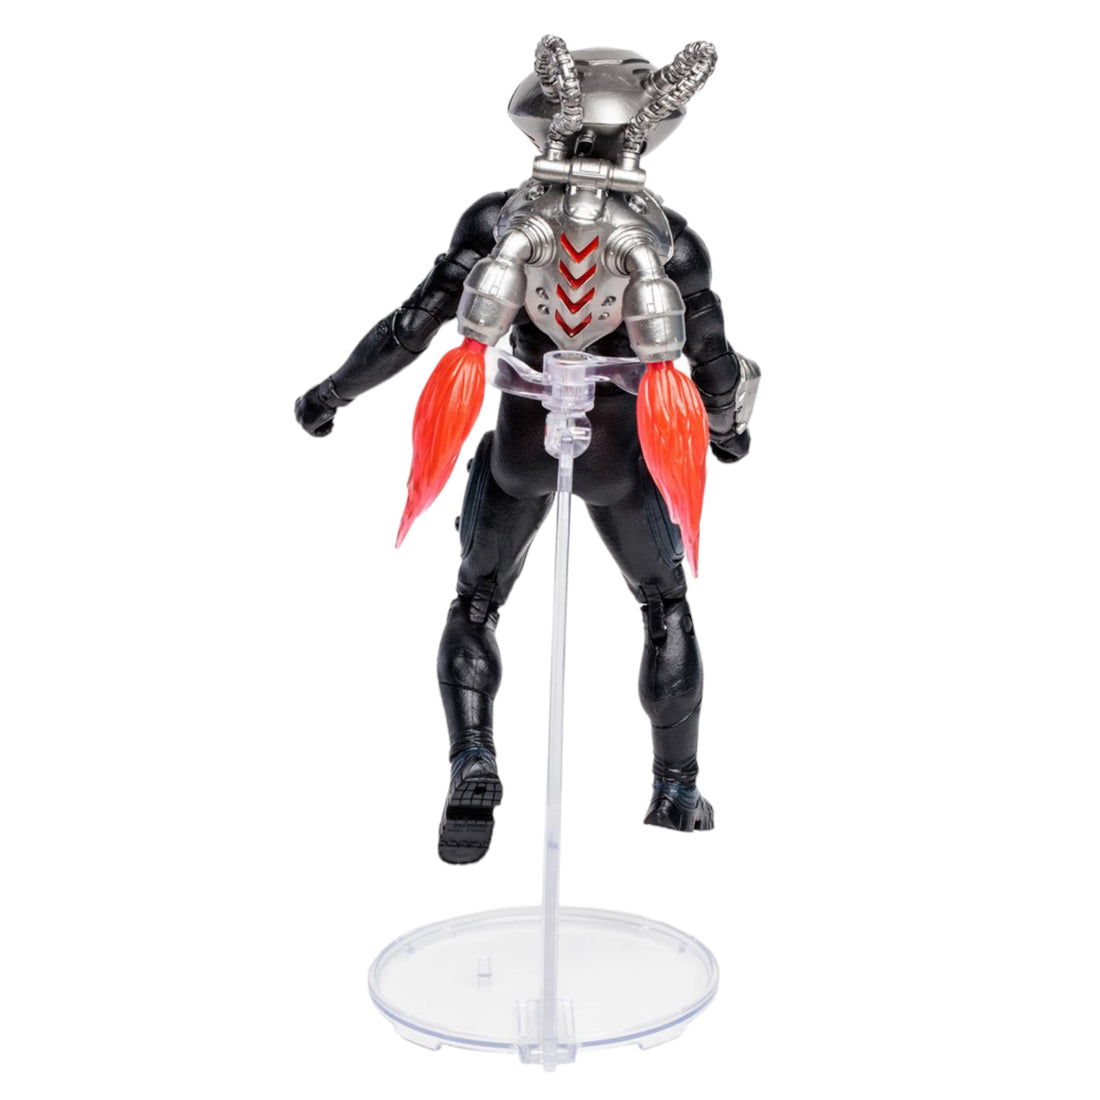 DC Multiverse Aquaman and the Lost Kingdom Movie Black Manta 7-Inch Scale Action Figure